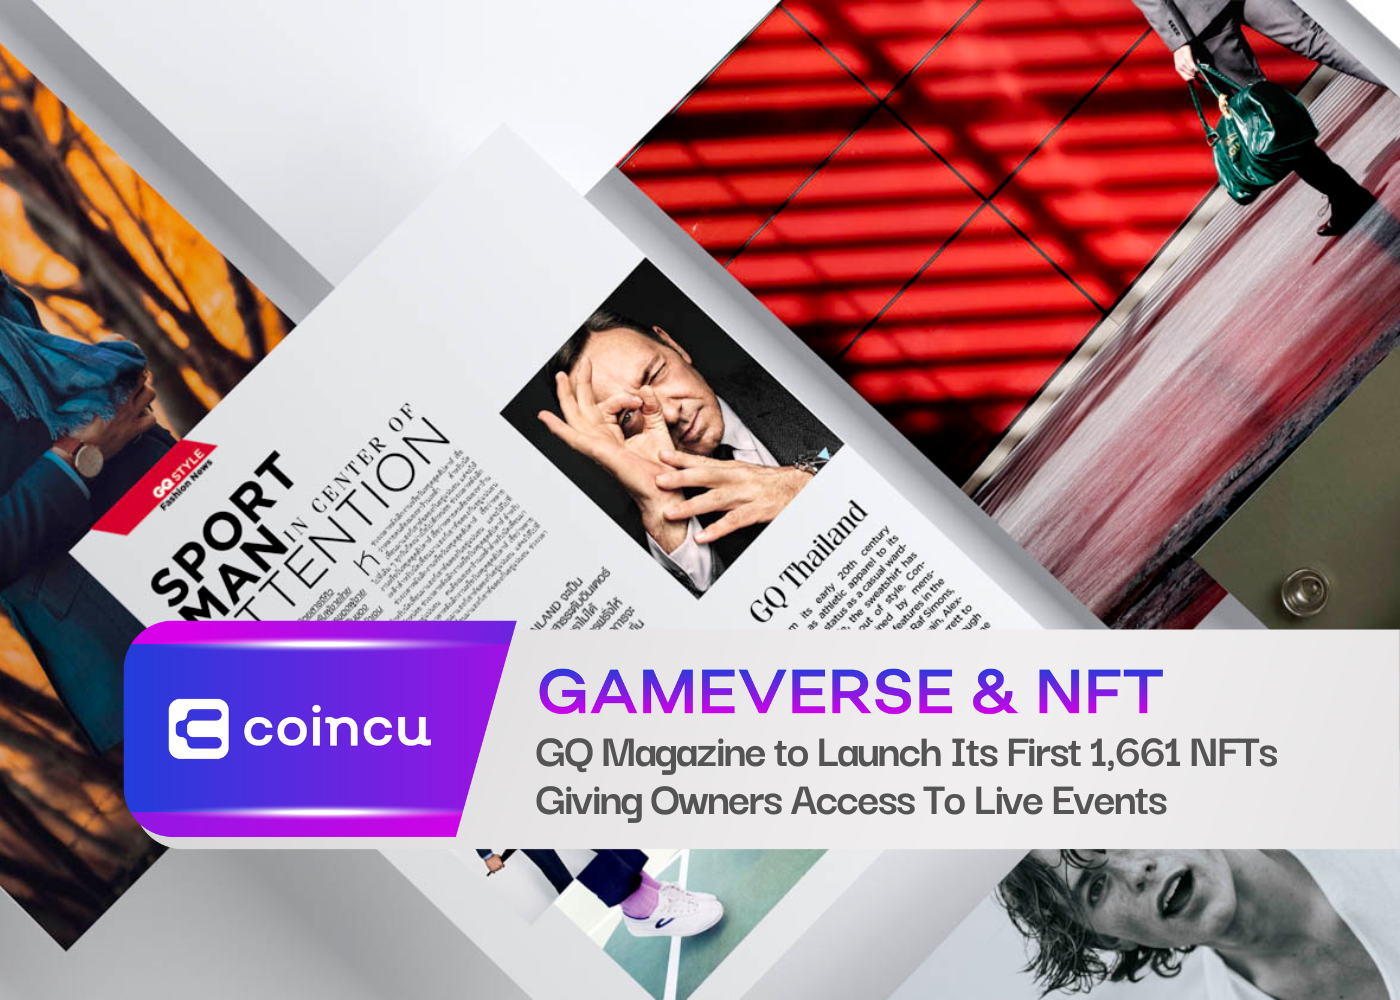 GQ Magazine to Launch Its First 1,661 NFTs Giving Owners Access To Live Events